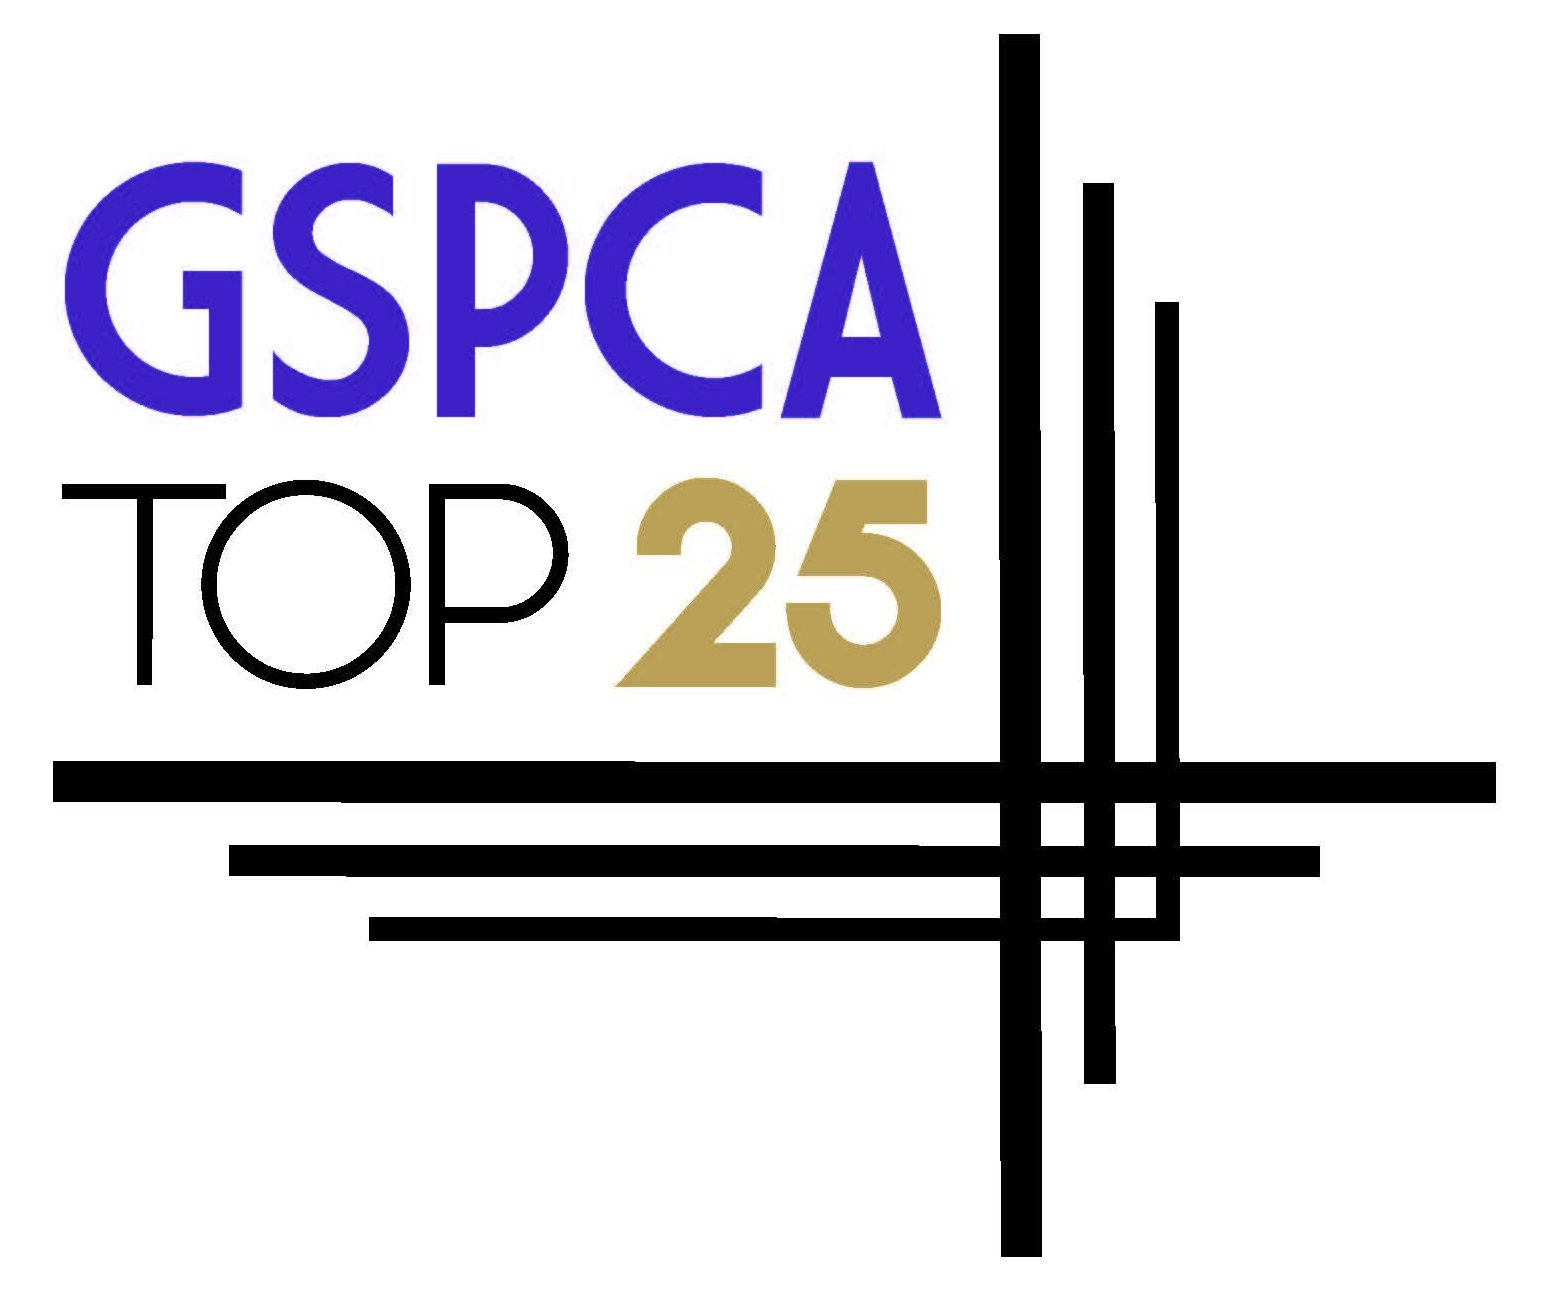 GSPCA Top 25 Competition